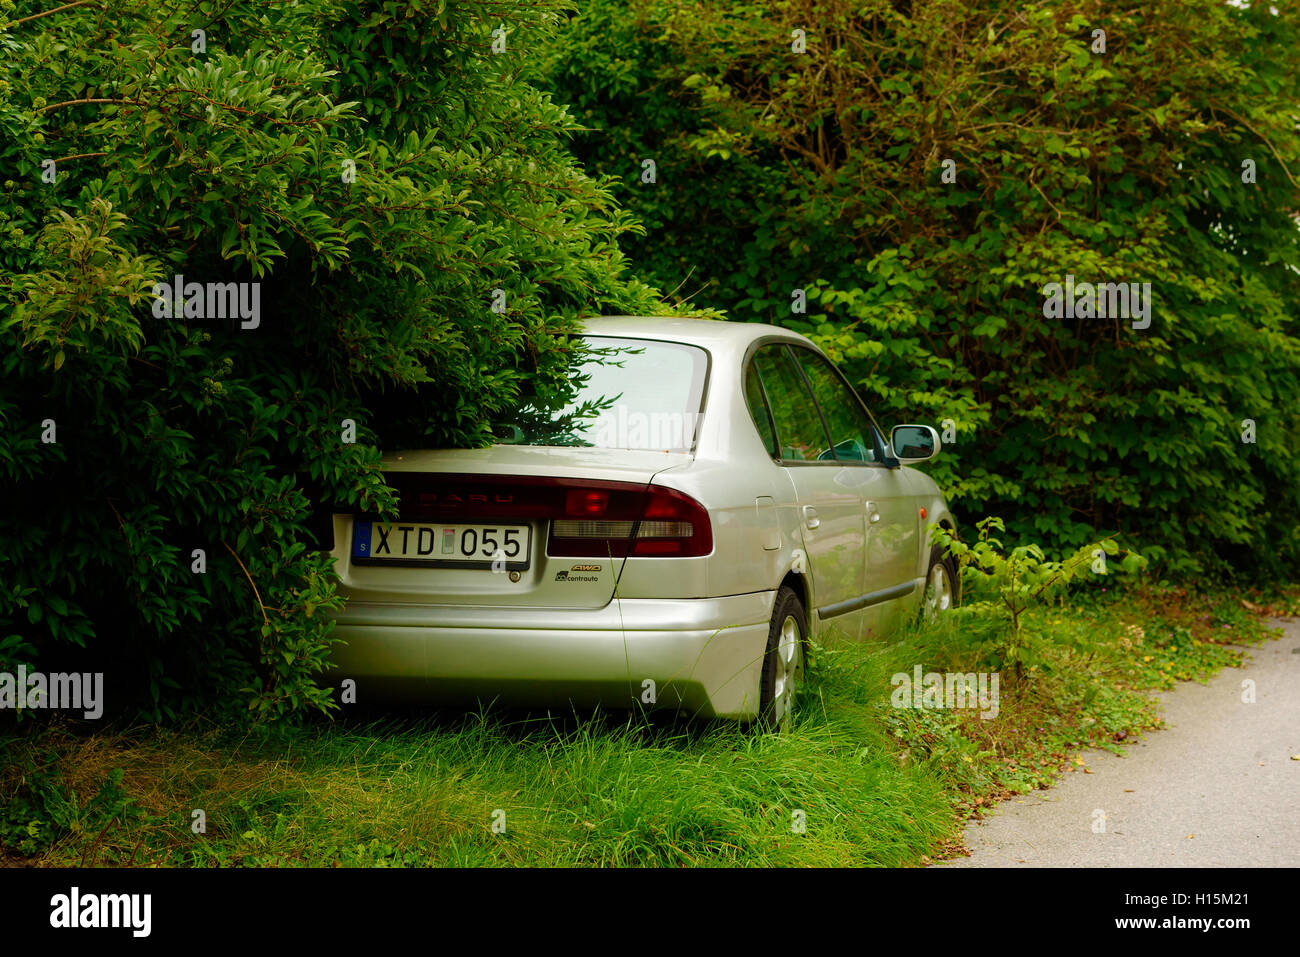 Skarhamn, Sweden - September 9, 2016: Environmental documentary of a 2000 Subaru Legacy parked roadside a long time ago and dese Stock Photo